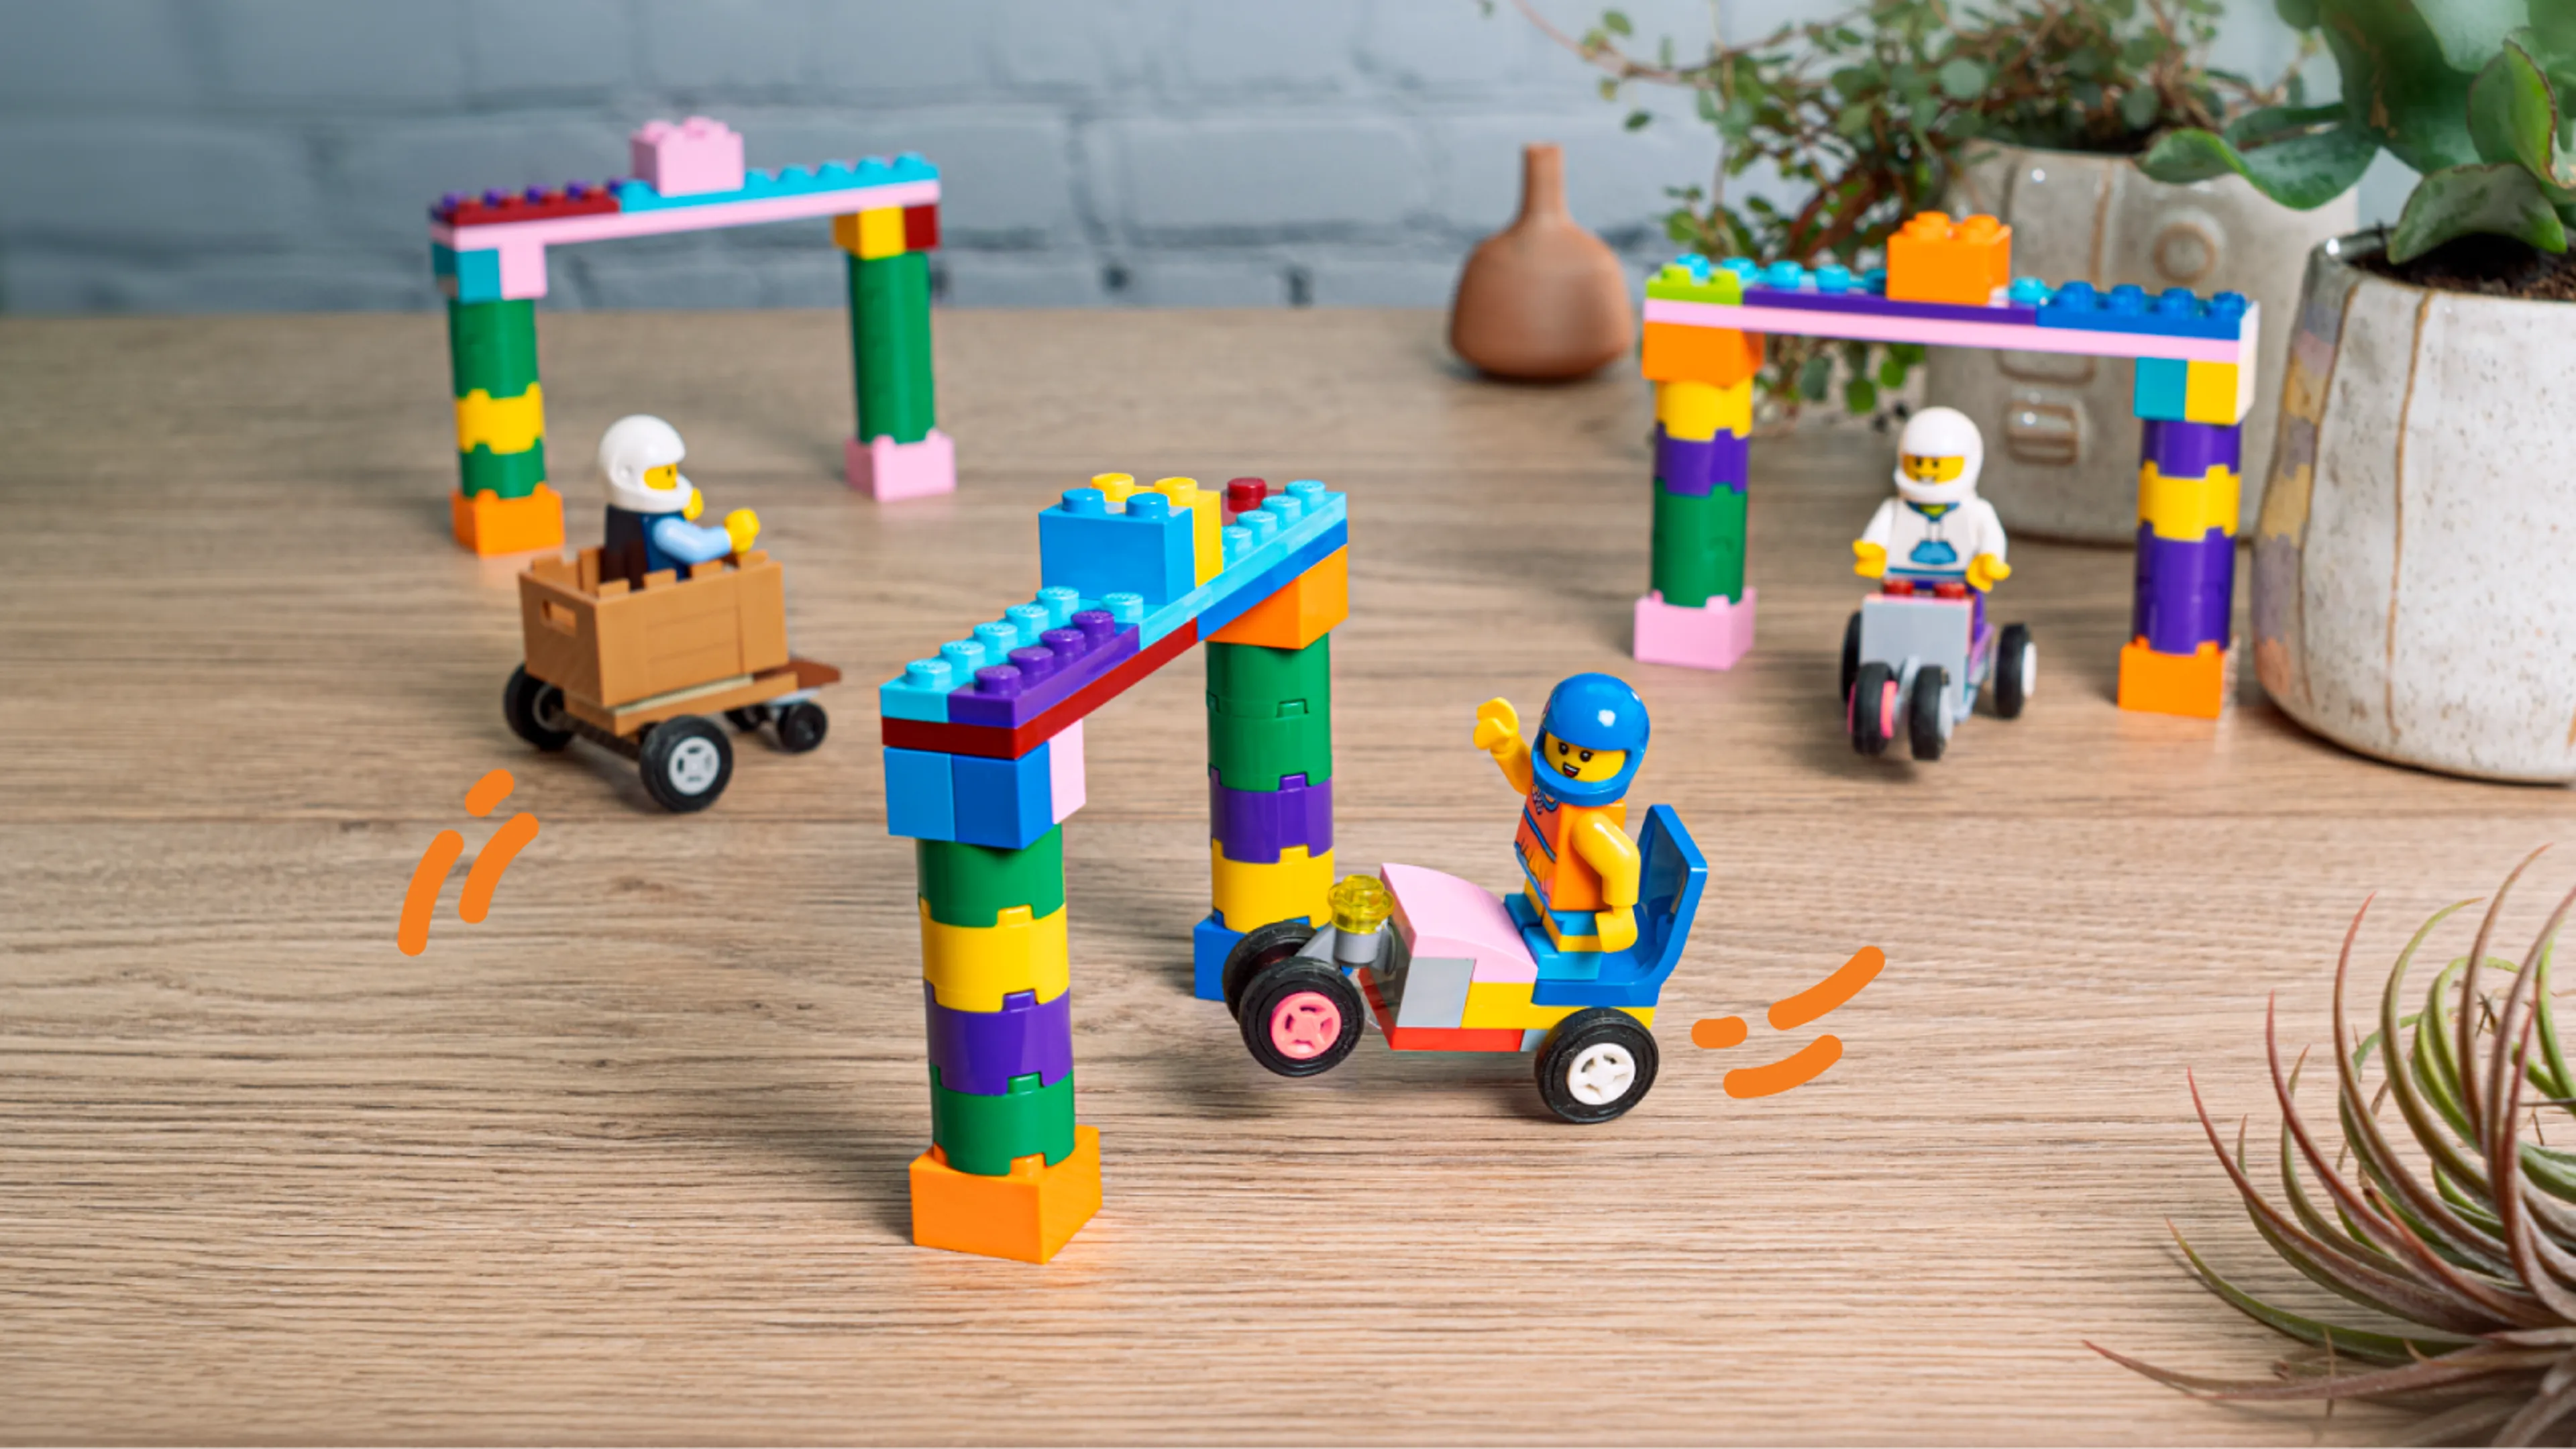 Minifigures racing through the track in LEGO soapbox cars